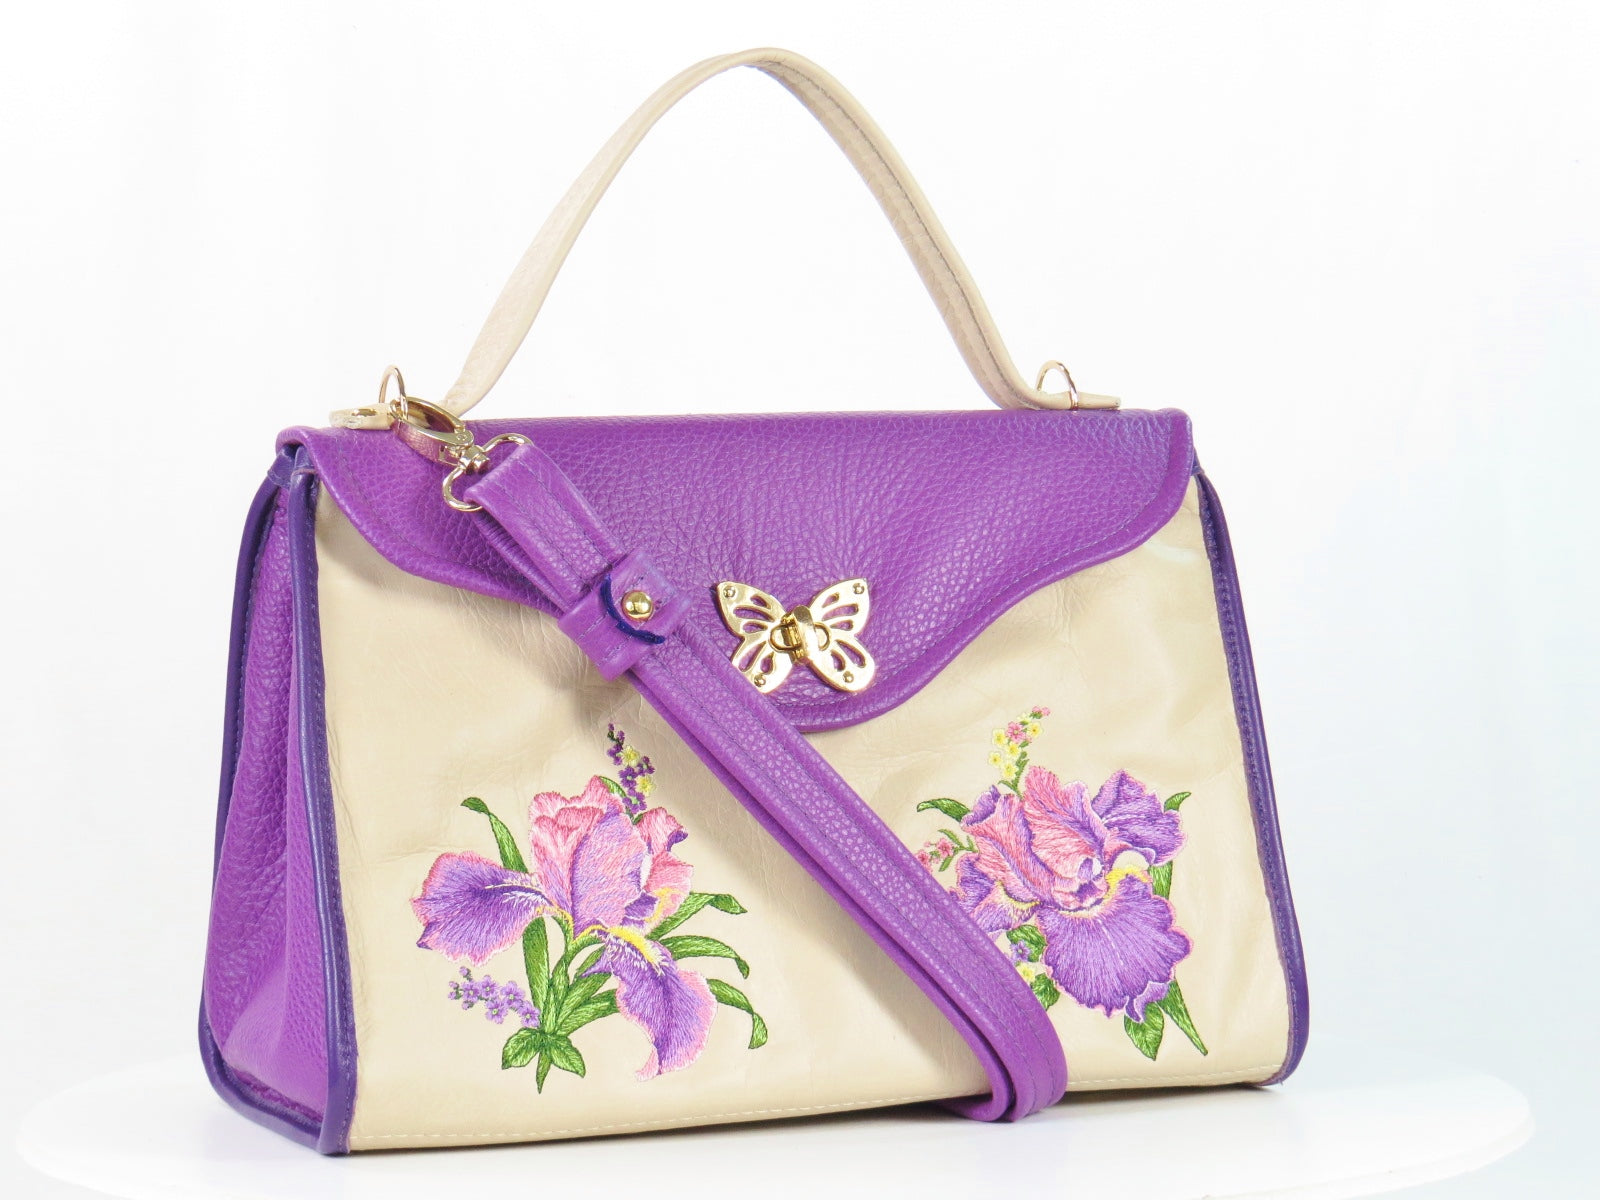 Embroidered Irises Purple and Beige Leather Purse